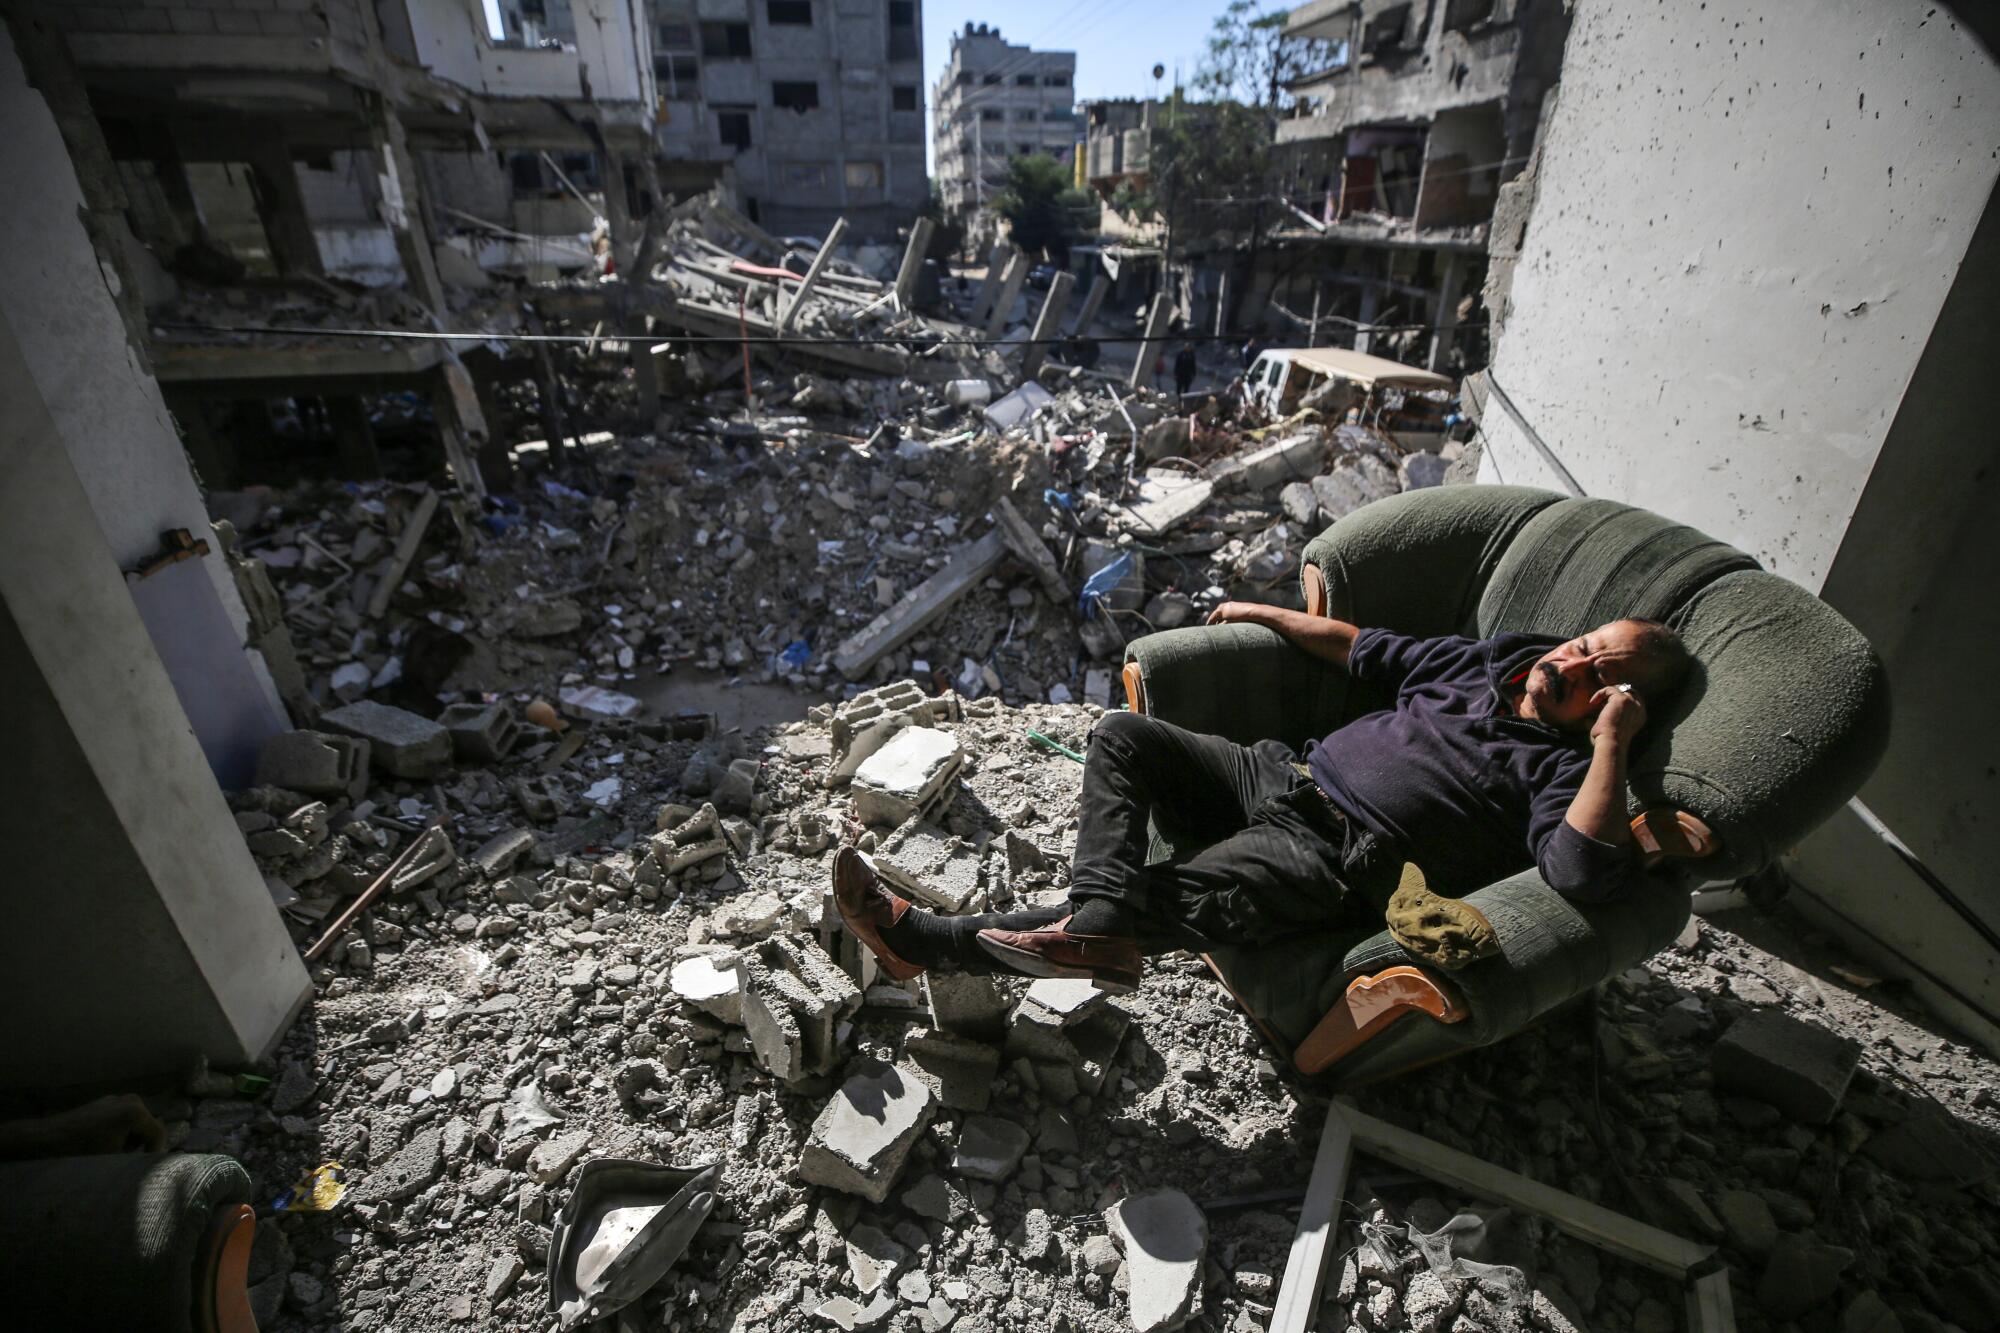 A man sitting in a chair amid rubble. 